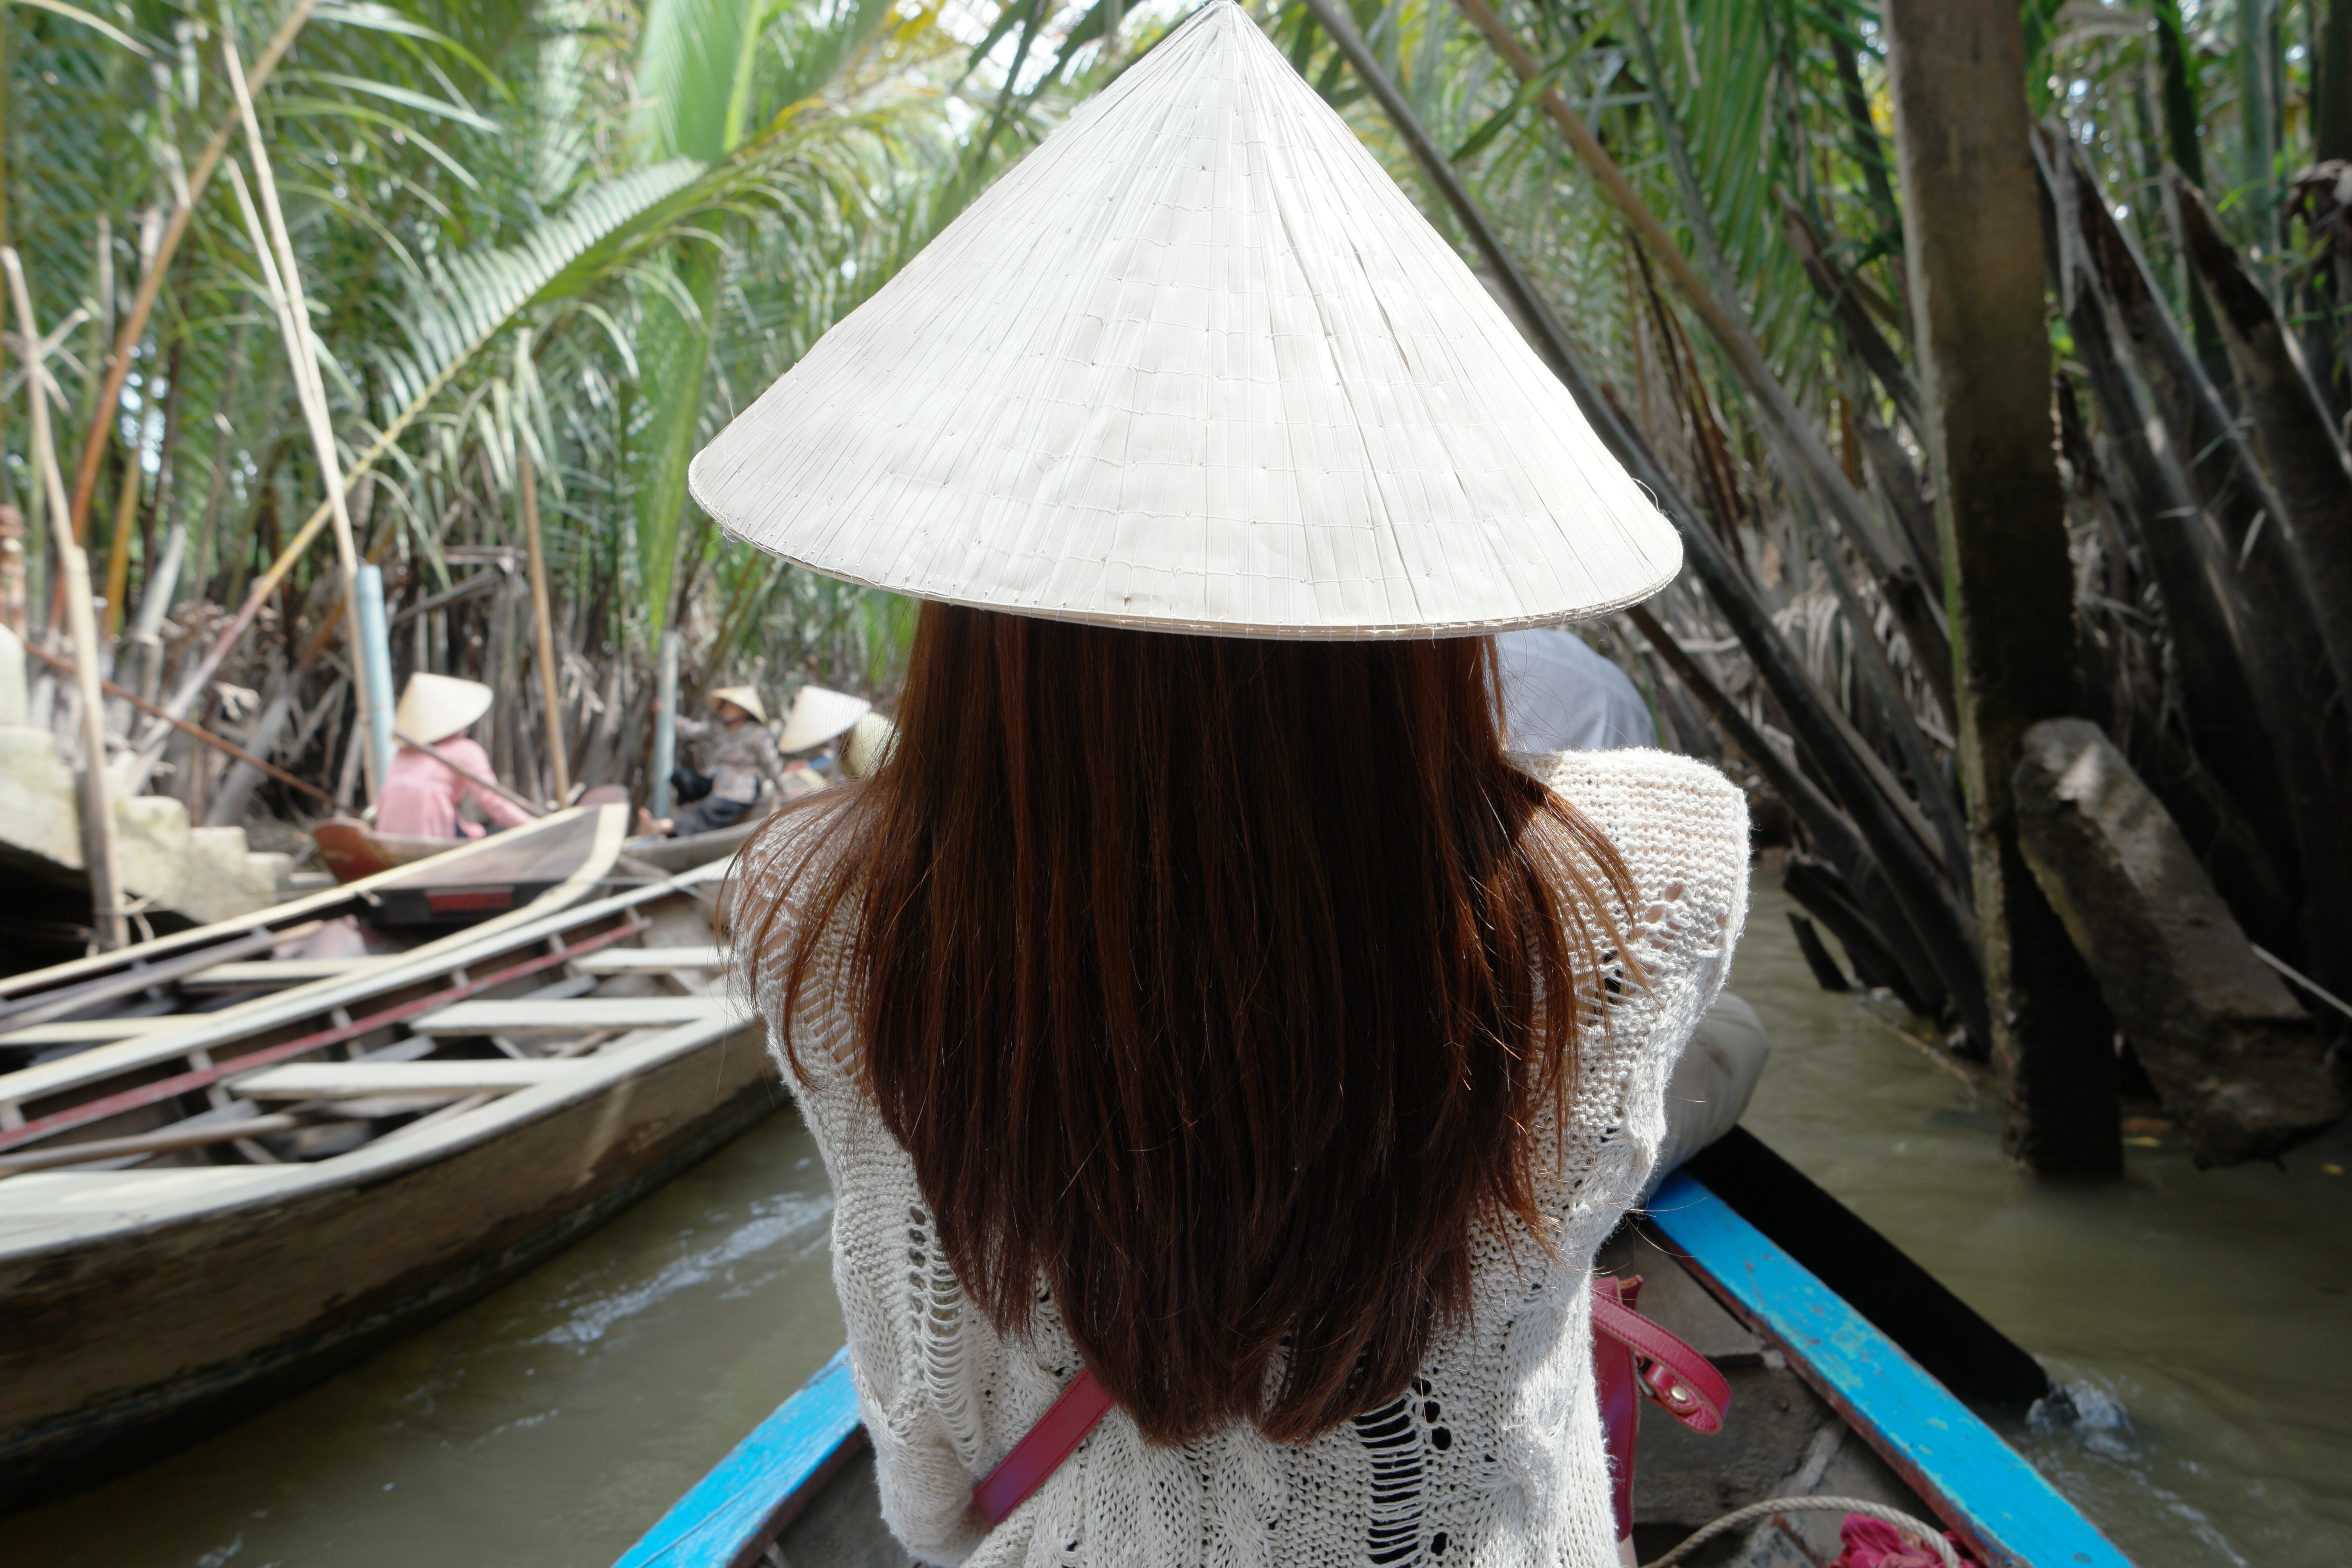 The Mekong River, The Mekong, Vietnam, rear view, one person